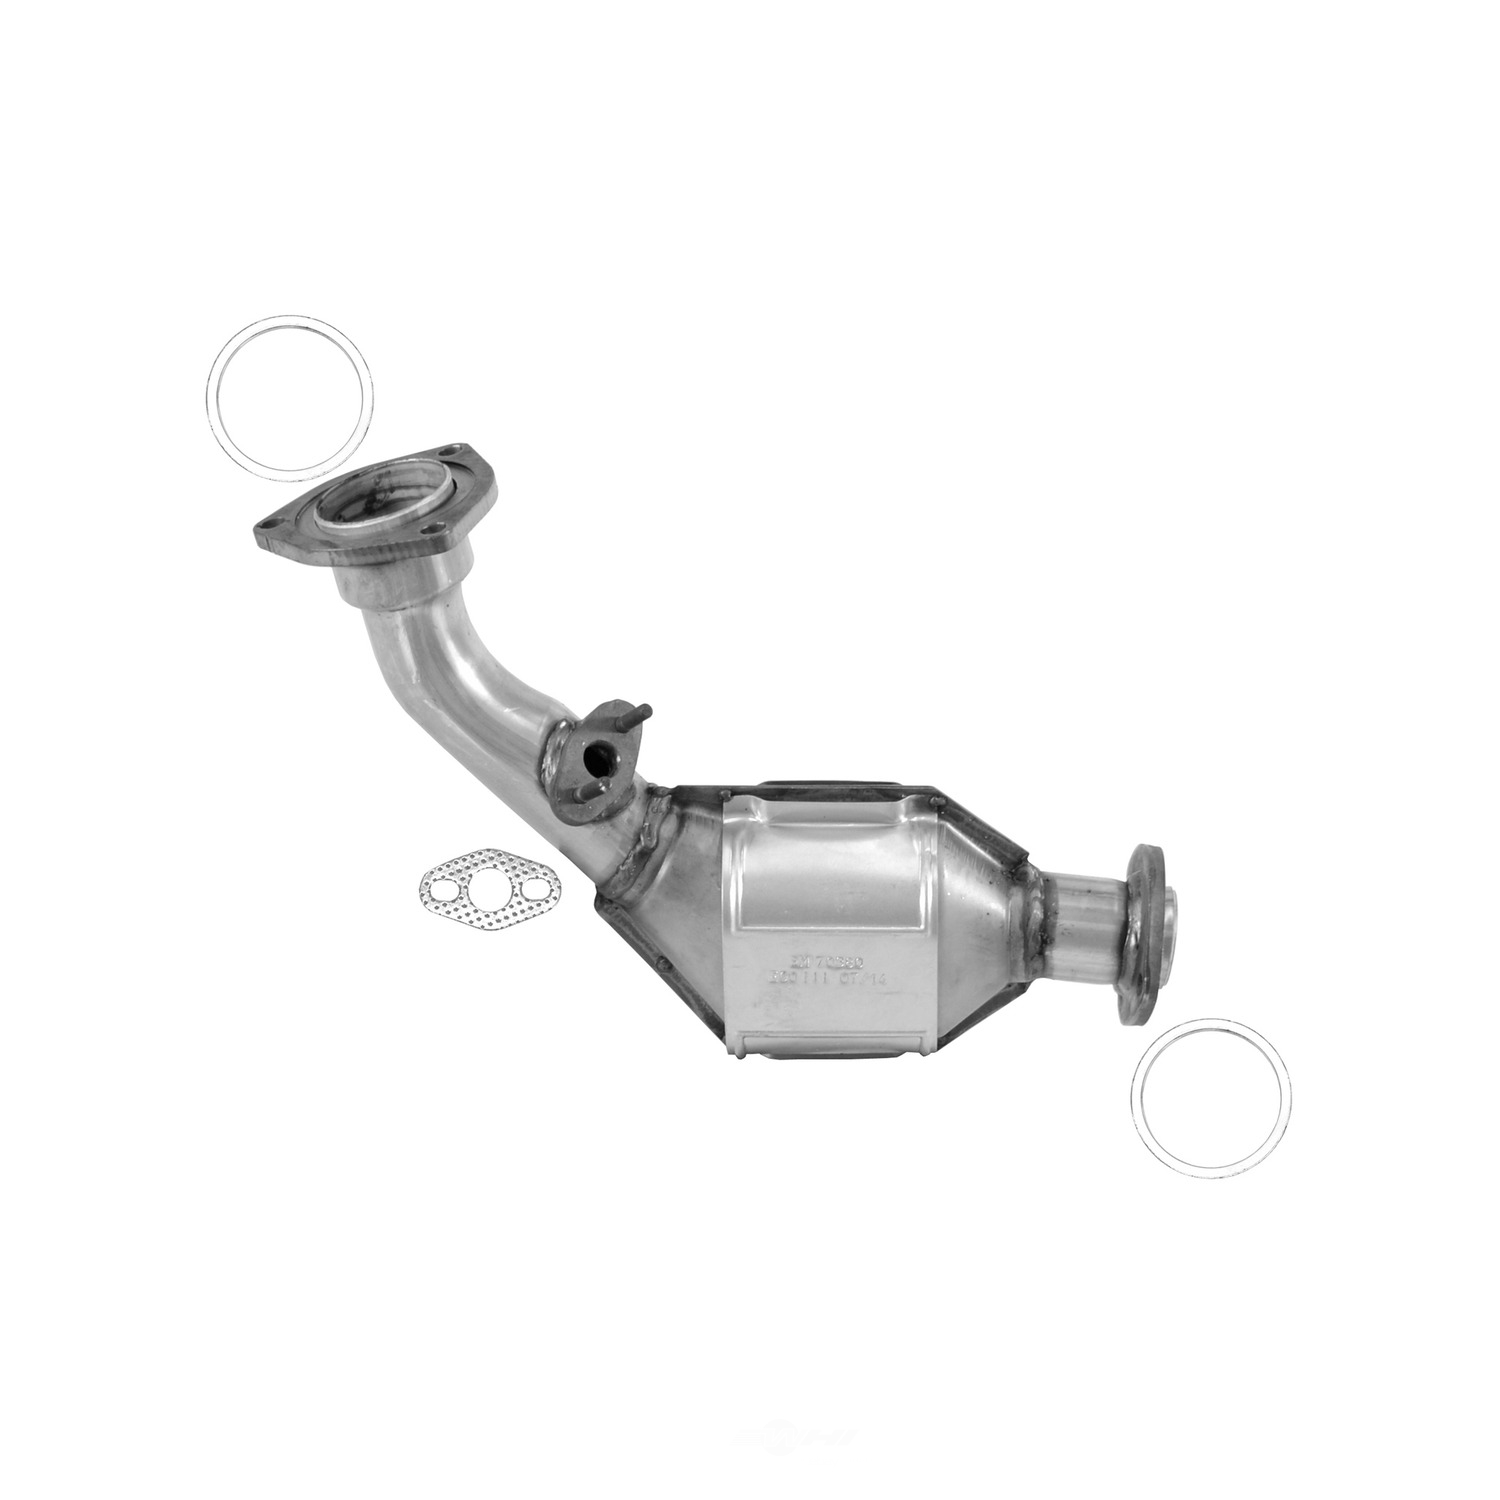 AP EXHAUST FEDERAL CONVERTER - Direct Fit Converter - APG 641188